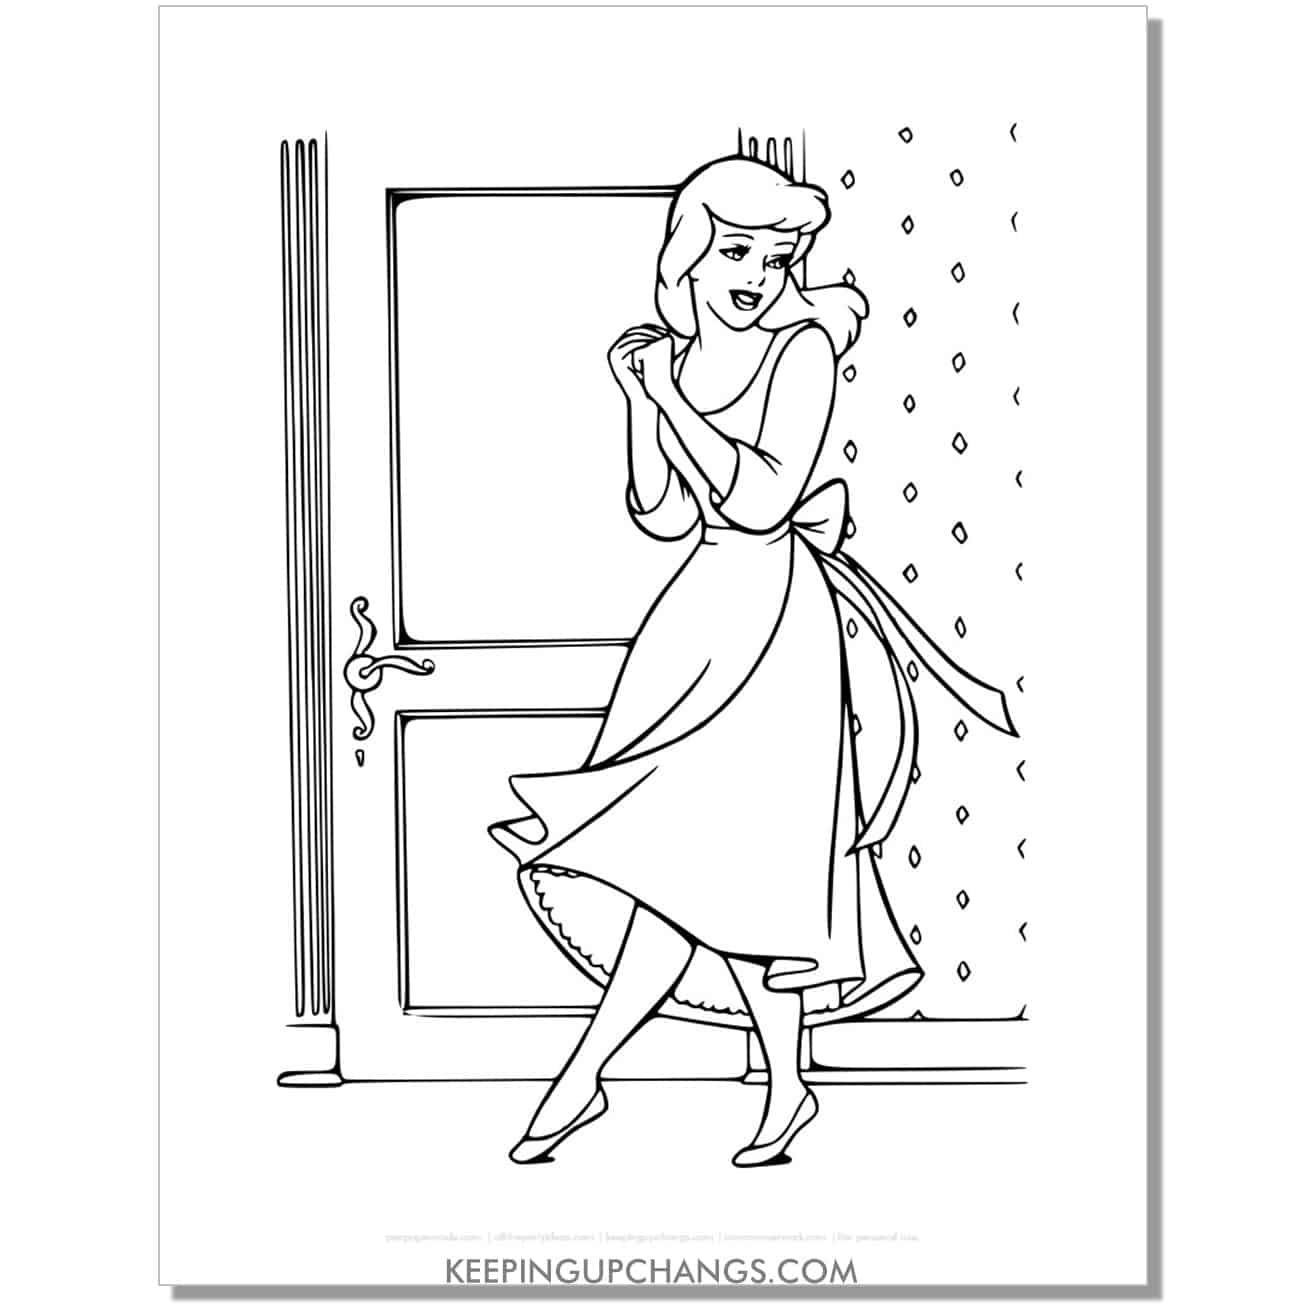 cinderella dancing in home coloring page, sheet.